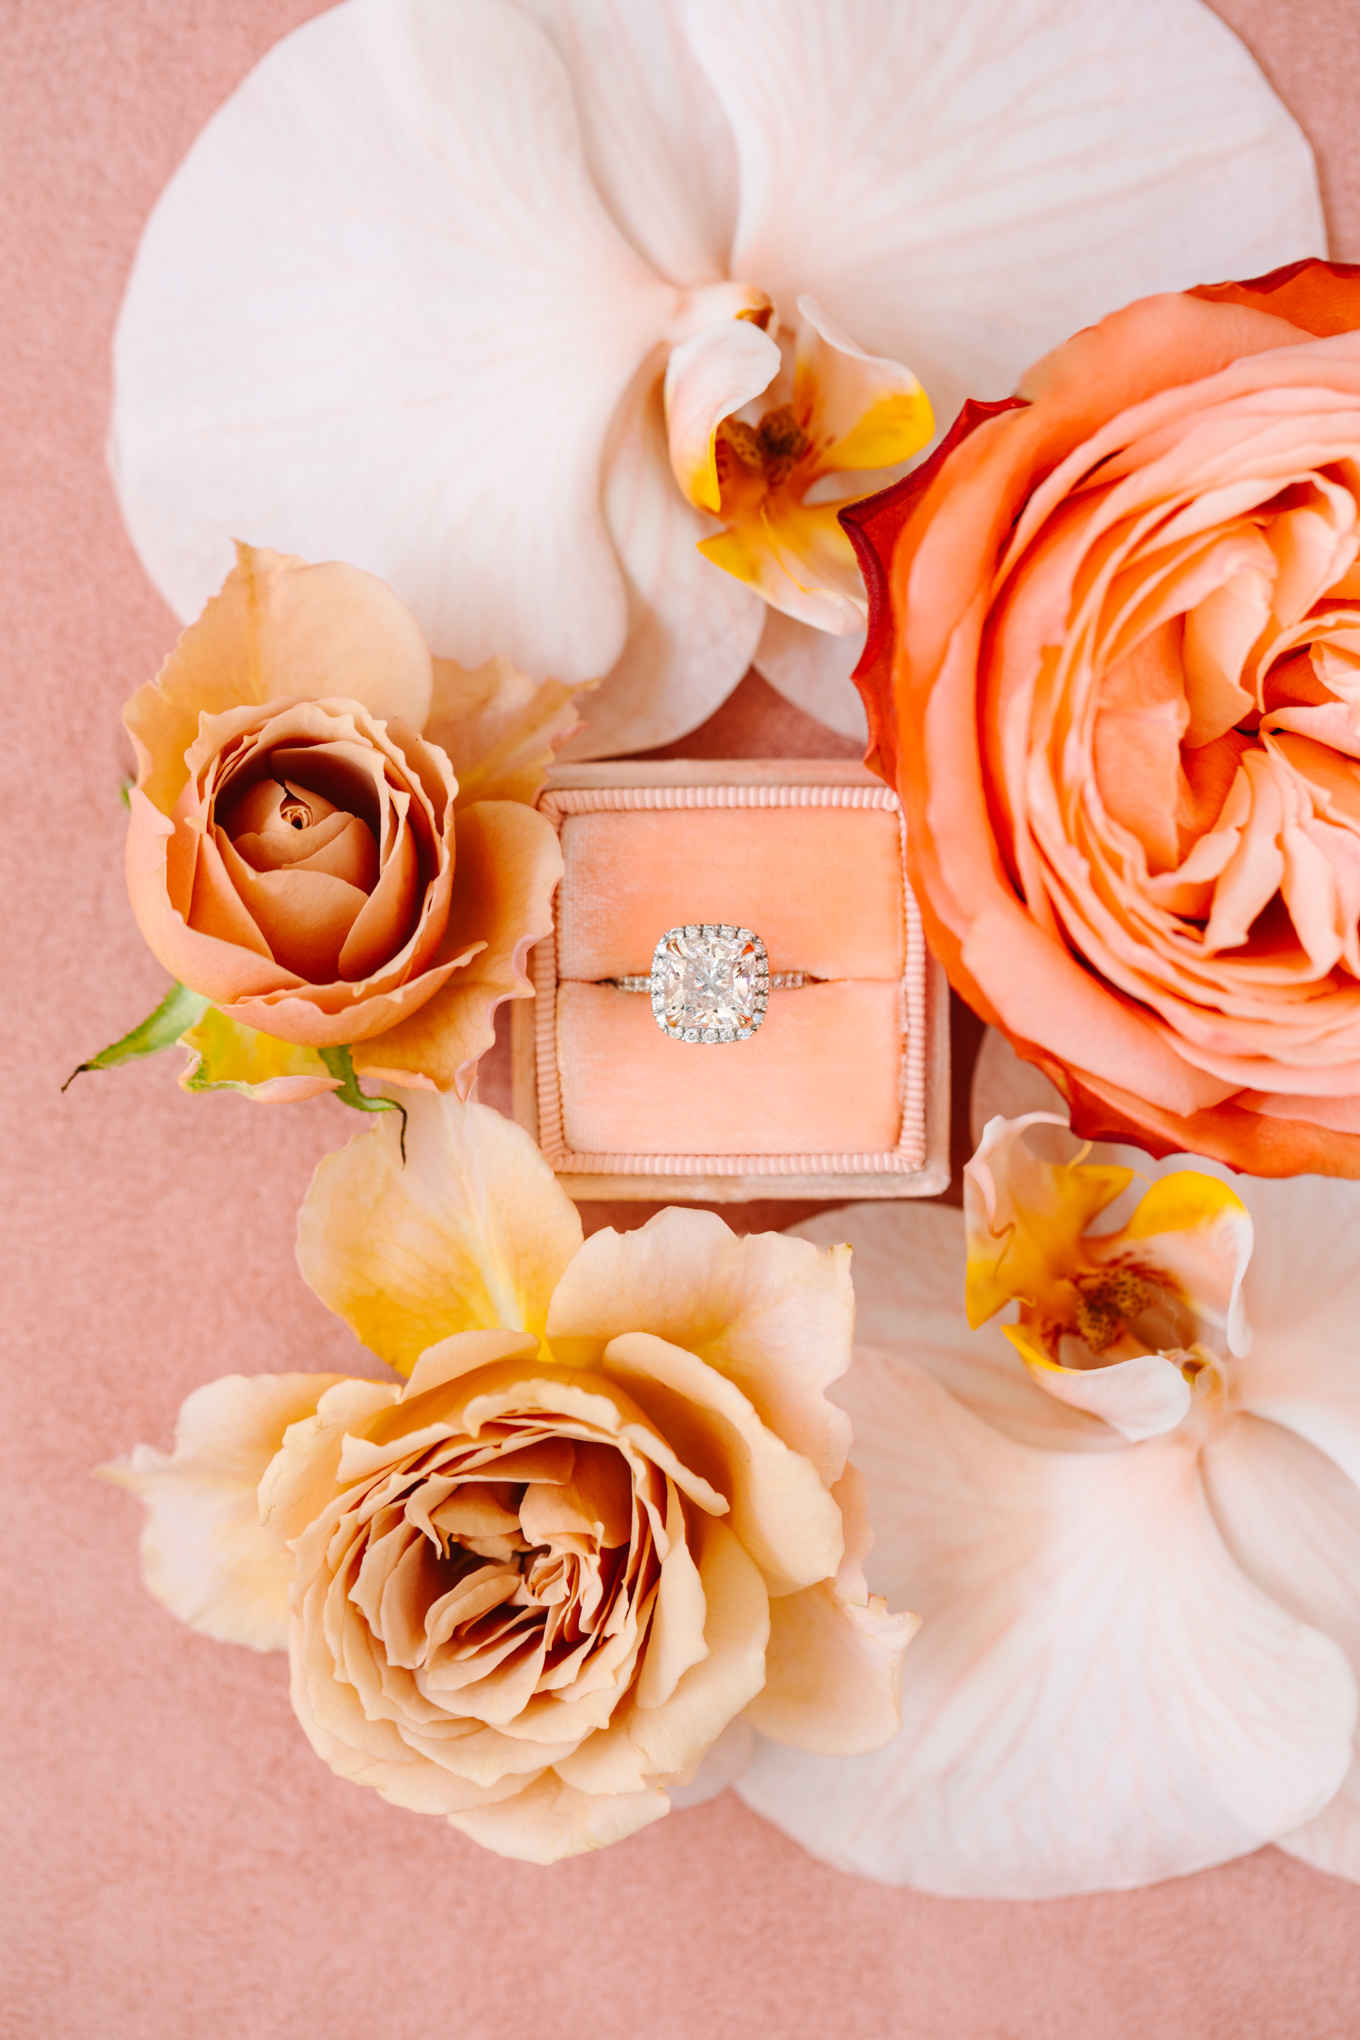 Engagement ring surrounded by peach, pink, and orange flowers | Pink and orange Lautner Compound wedding | Colorful Palm Springs wedding photography | #palmspringsphotographer #palmspringswedding #lautnercompound #southerncaliforniawedding  Source: Mary Costa Photography | Los Angeles